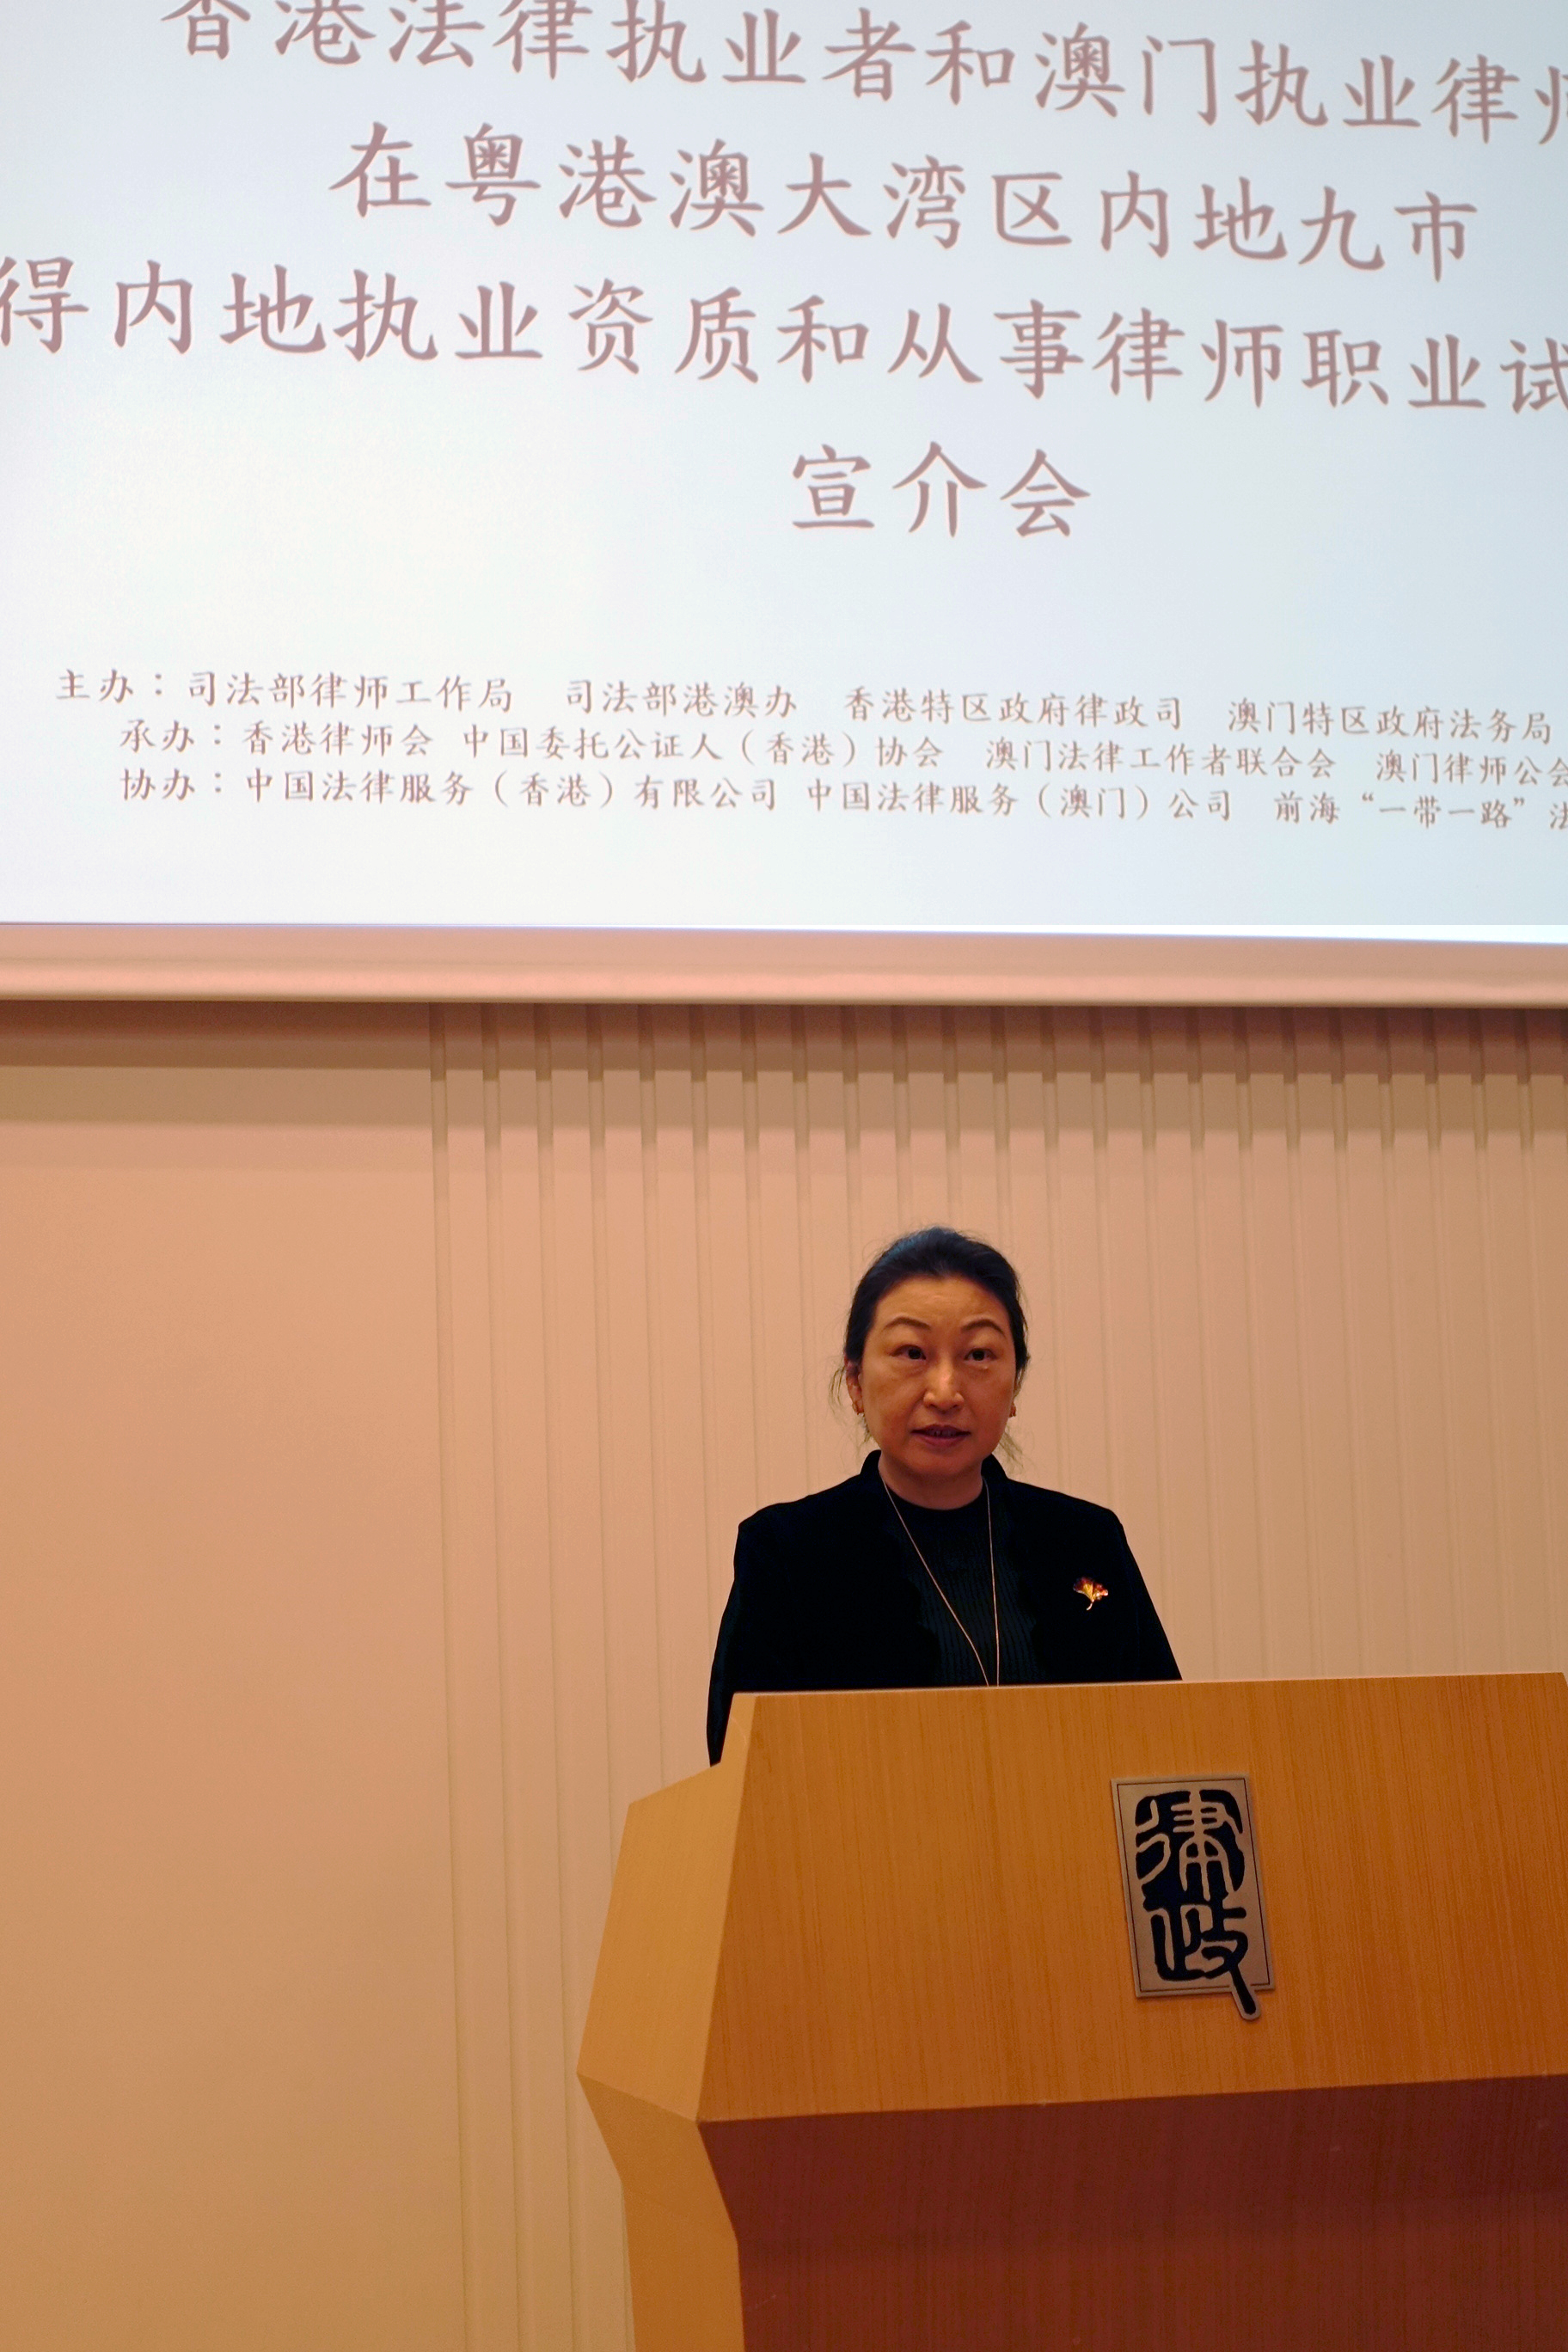 The briefing on the pilot programme for Hong Kong and Macao legal practitioners to obtain Mainland practice qualifications and to practise law in the nine Pearl River Delta municipalities in the Guangdong-Hong Kong-Macao Greater Bay Area was held today (November 19). Photo shows the Secretary for Justice, Ms Teresa Cheng, SC, speaking at the briefing.